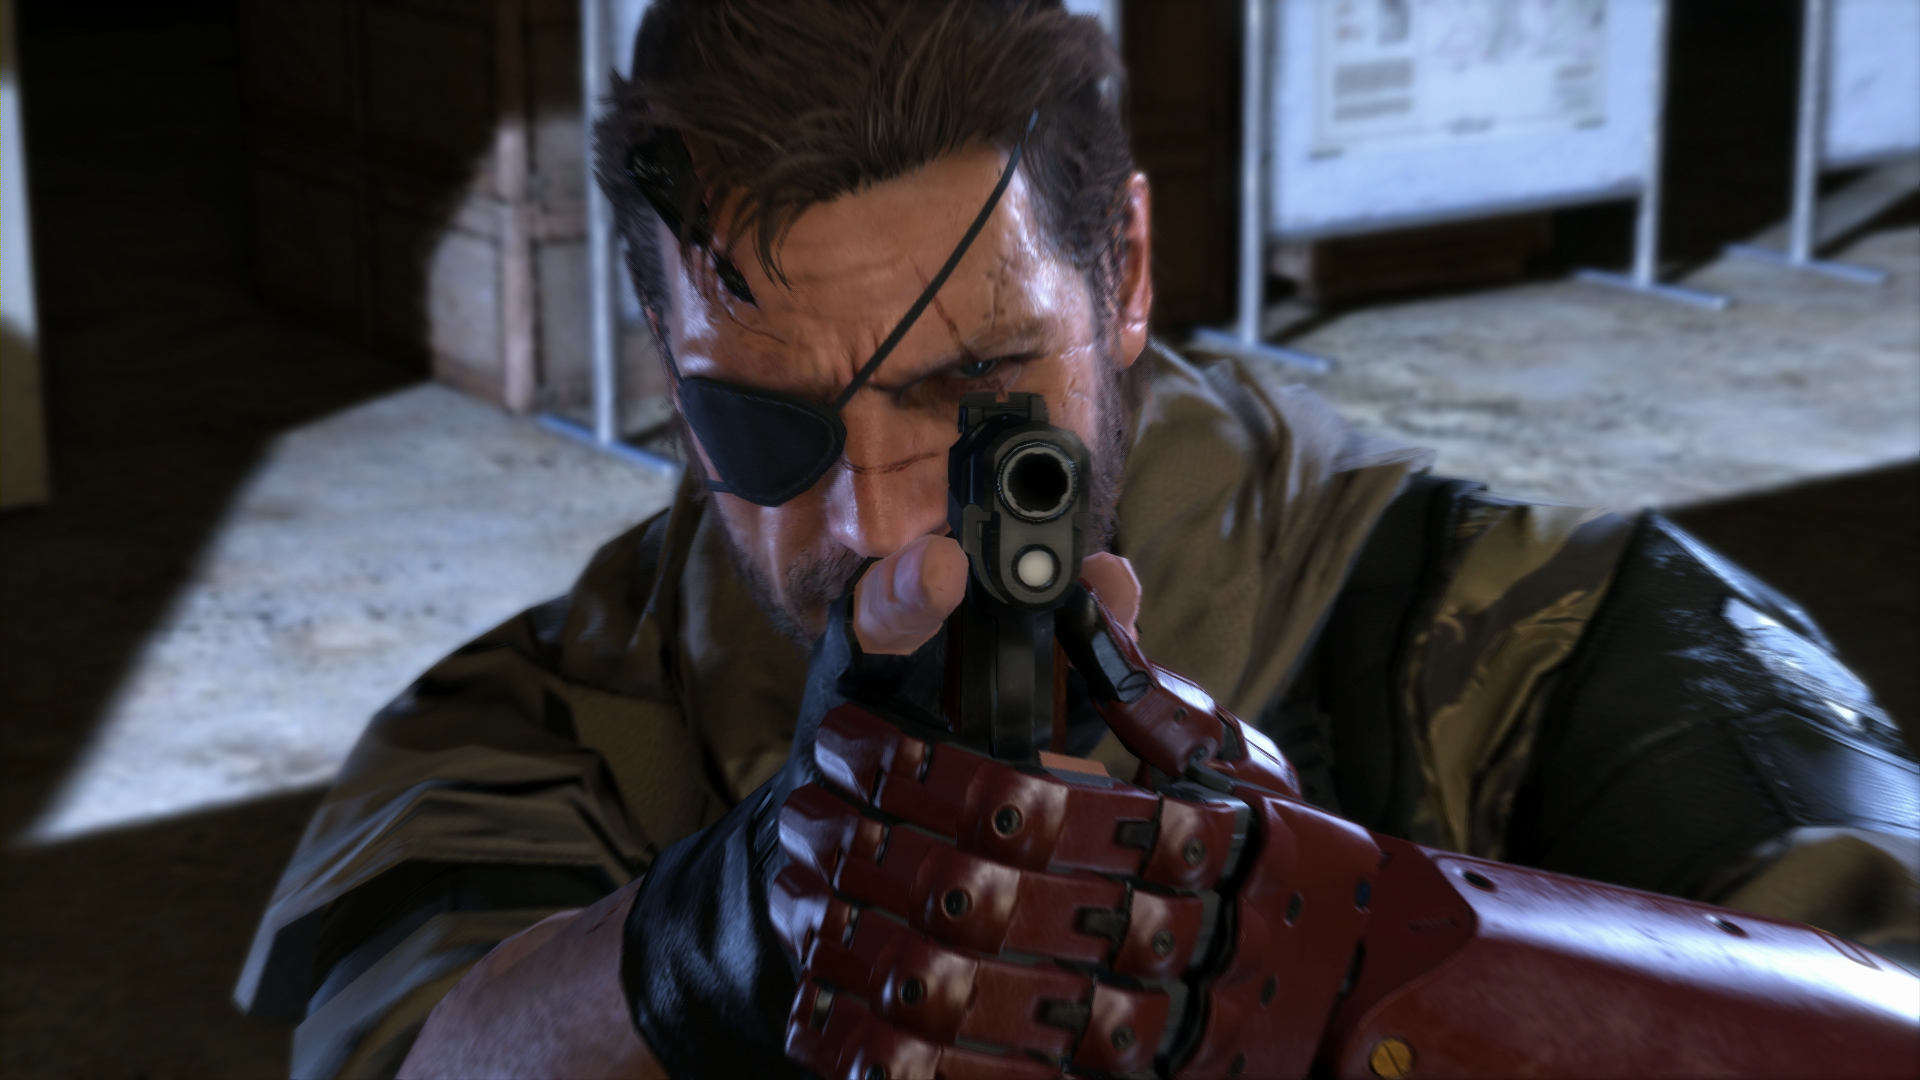 Save 75% on METAL GEAR SOLID V: THE PHANTOM PAIN on Steam